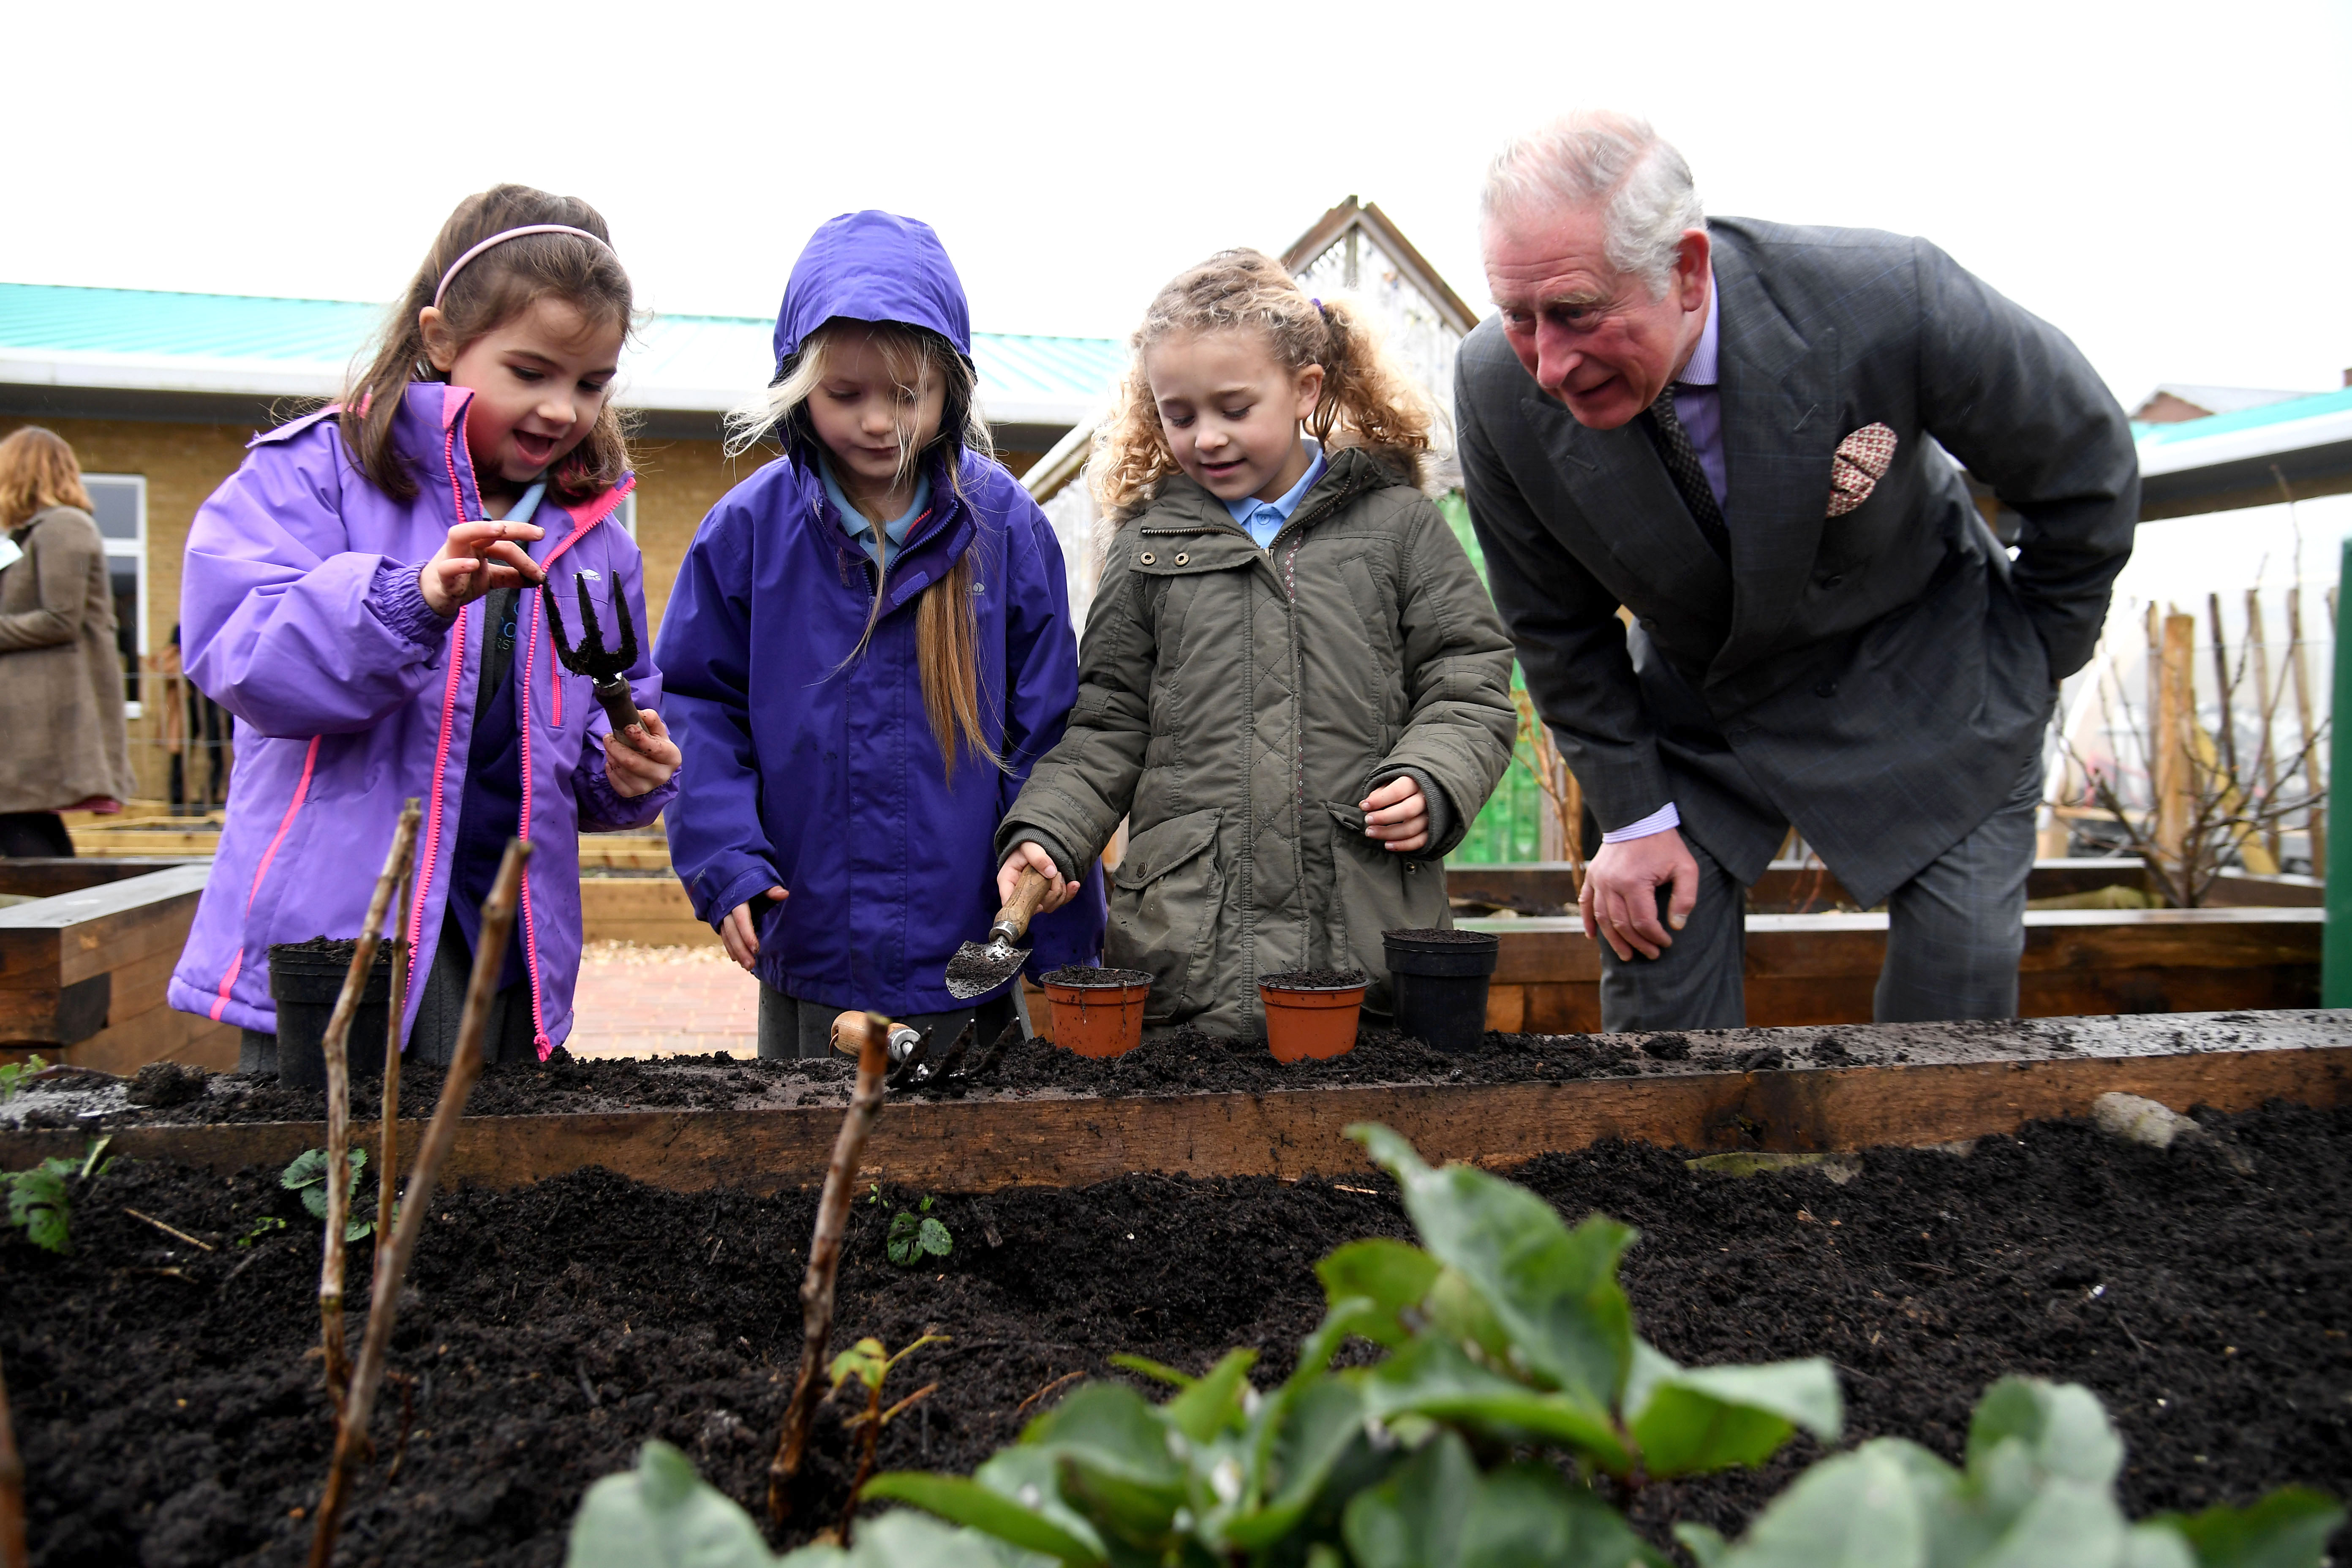 H.R.H. The Prince of Wales with children from Damers First School in Poundbury, England. (c) 2017. The Duchy of Cornwall. Photo: Finnbarr Webster. Used with permission.